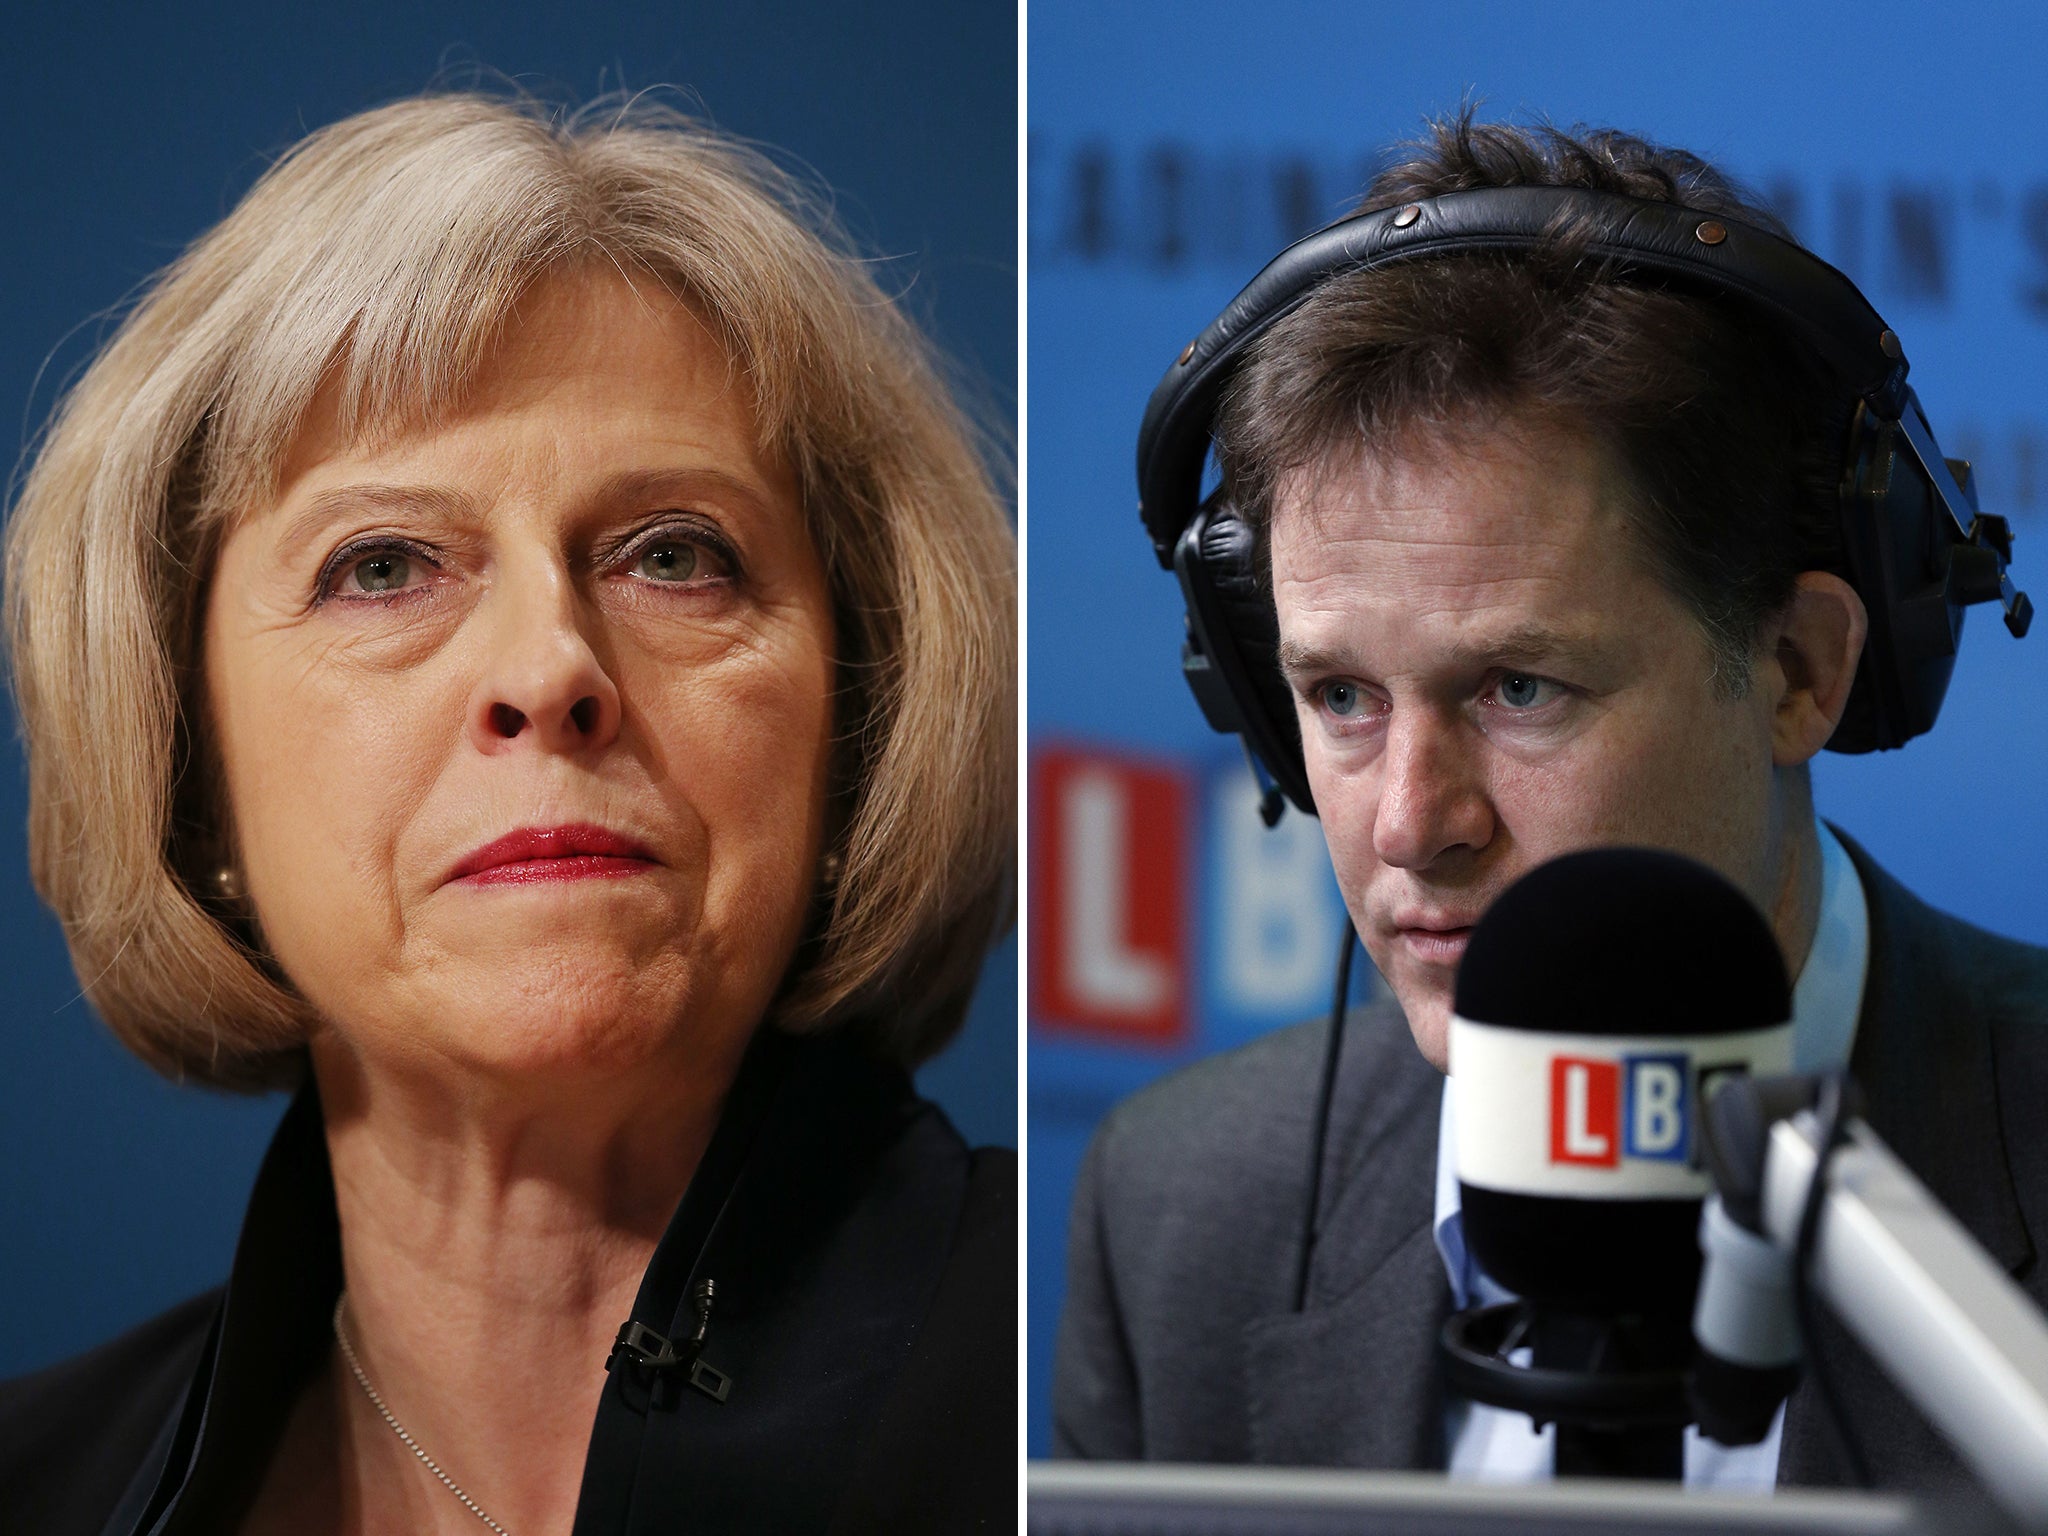 Theresa May accused the Lib Dems of endangering
children’s lives, which Nick Clegg angrily denied on LBC radio